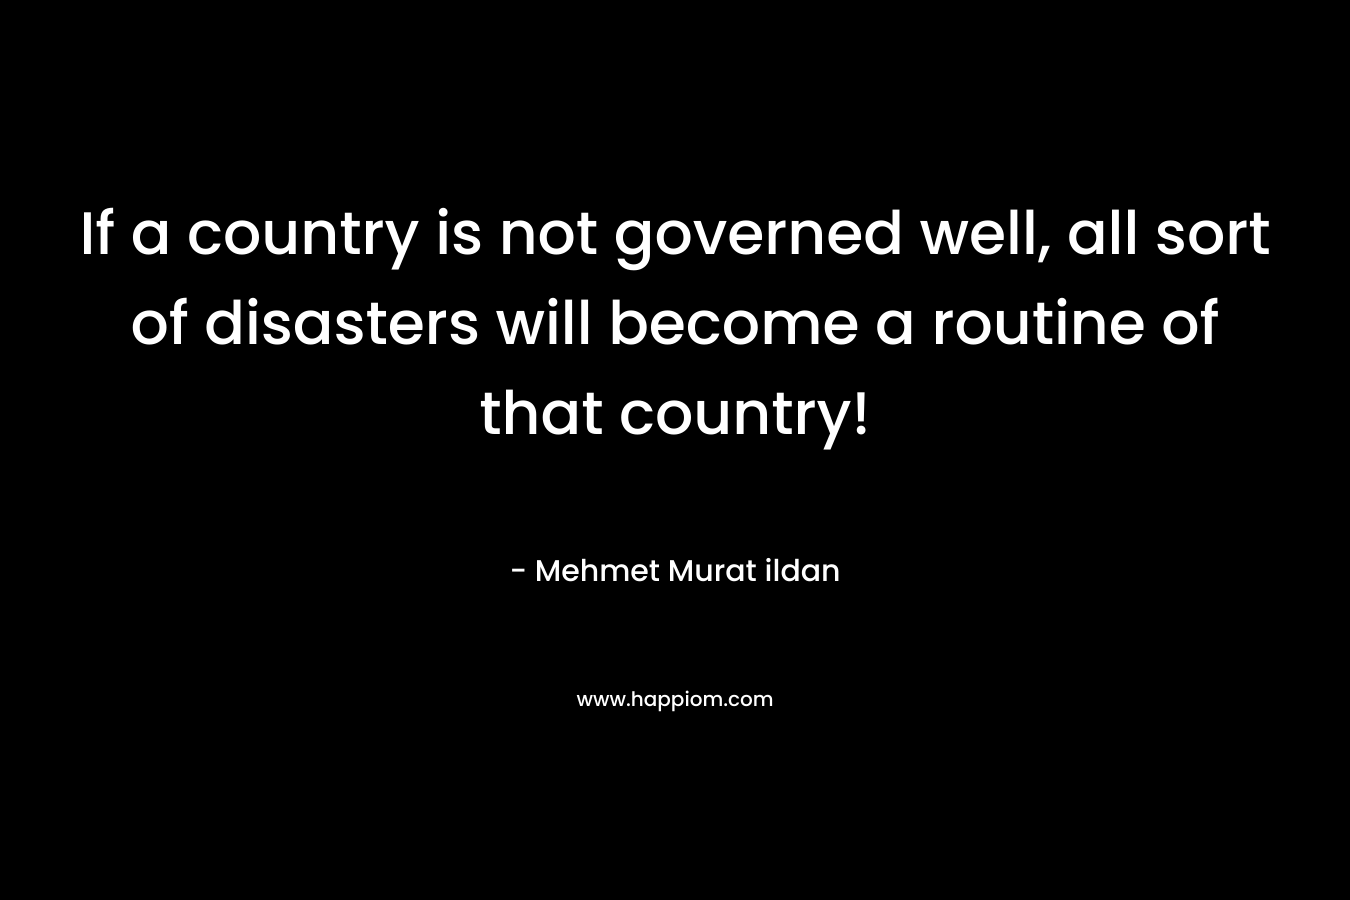 If a country is not governed well, all sort of disasters will become a routine of that country! – Mehmet Murat ildan